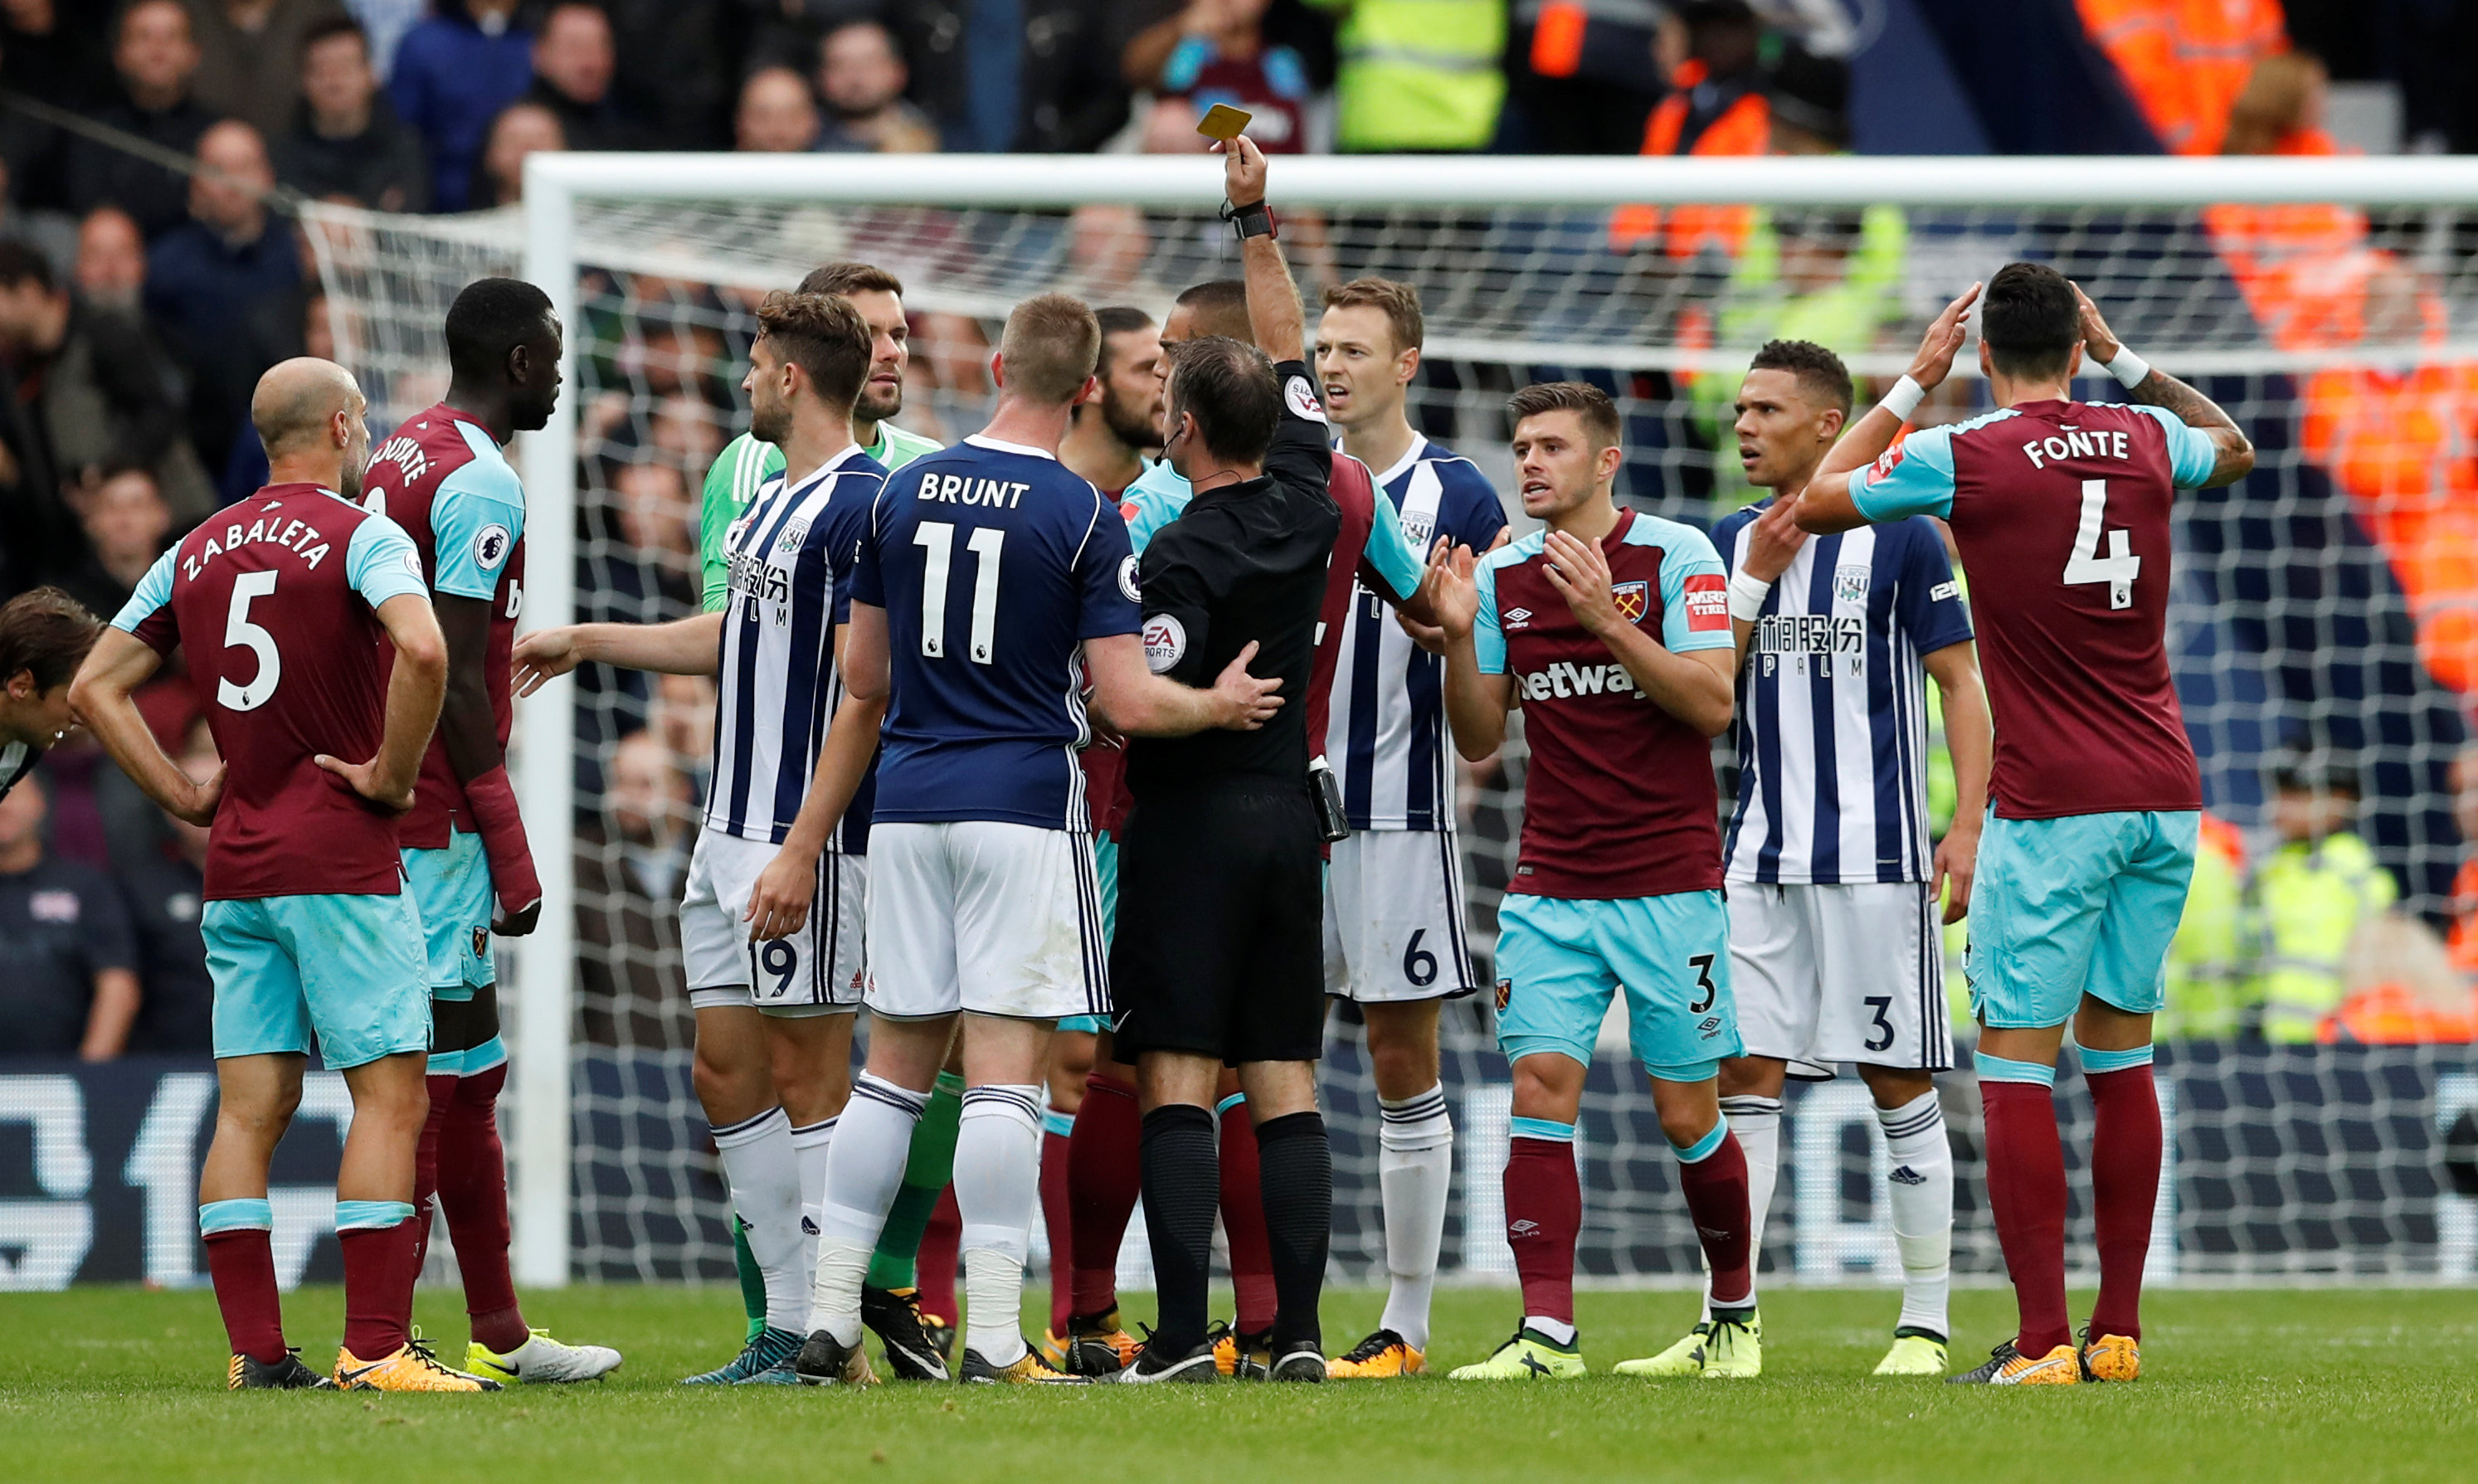 Football: Ben Foster fortunate as West Brom draw with West Ham